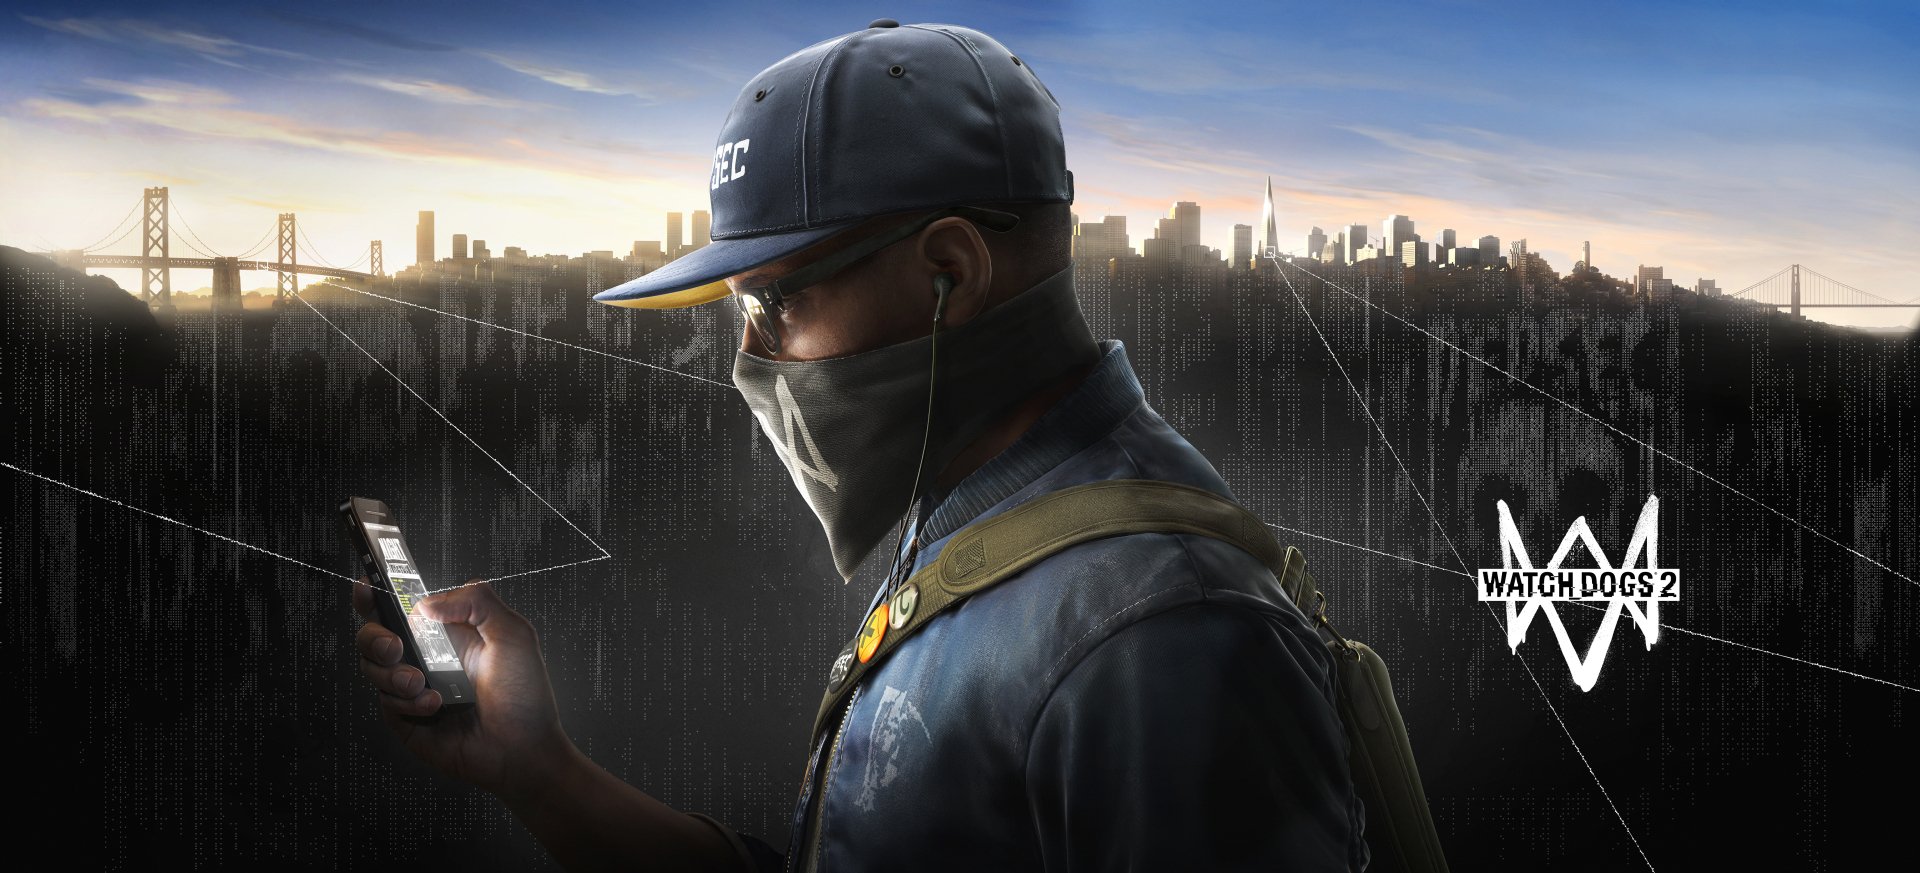 watch dogs 2 download for pc ocean of games